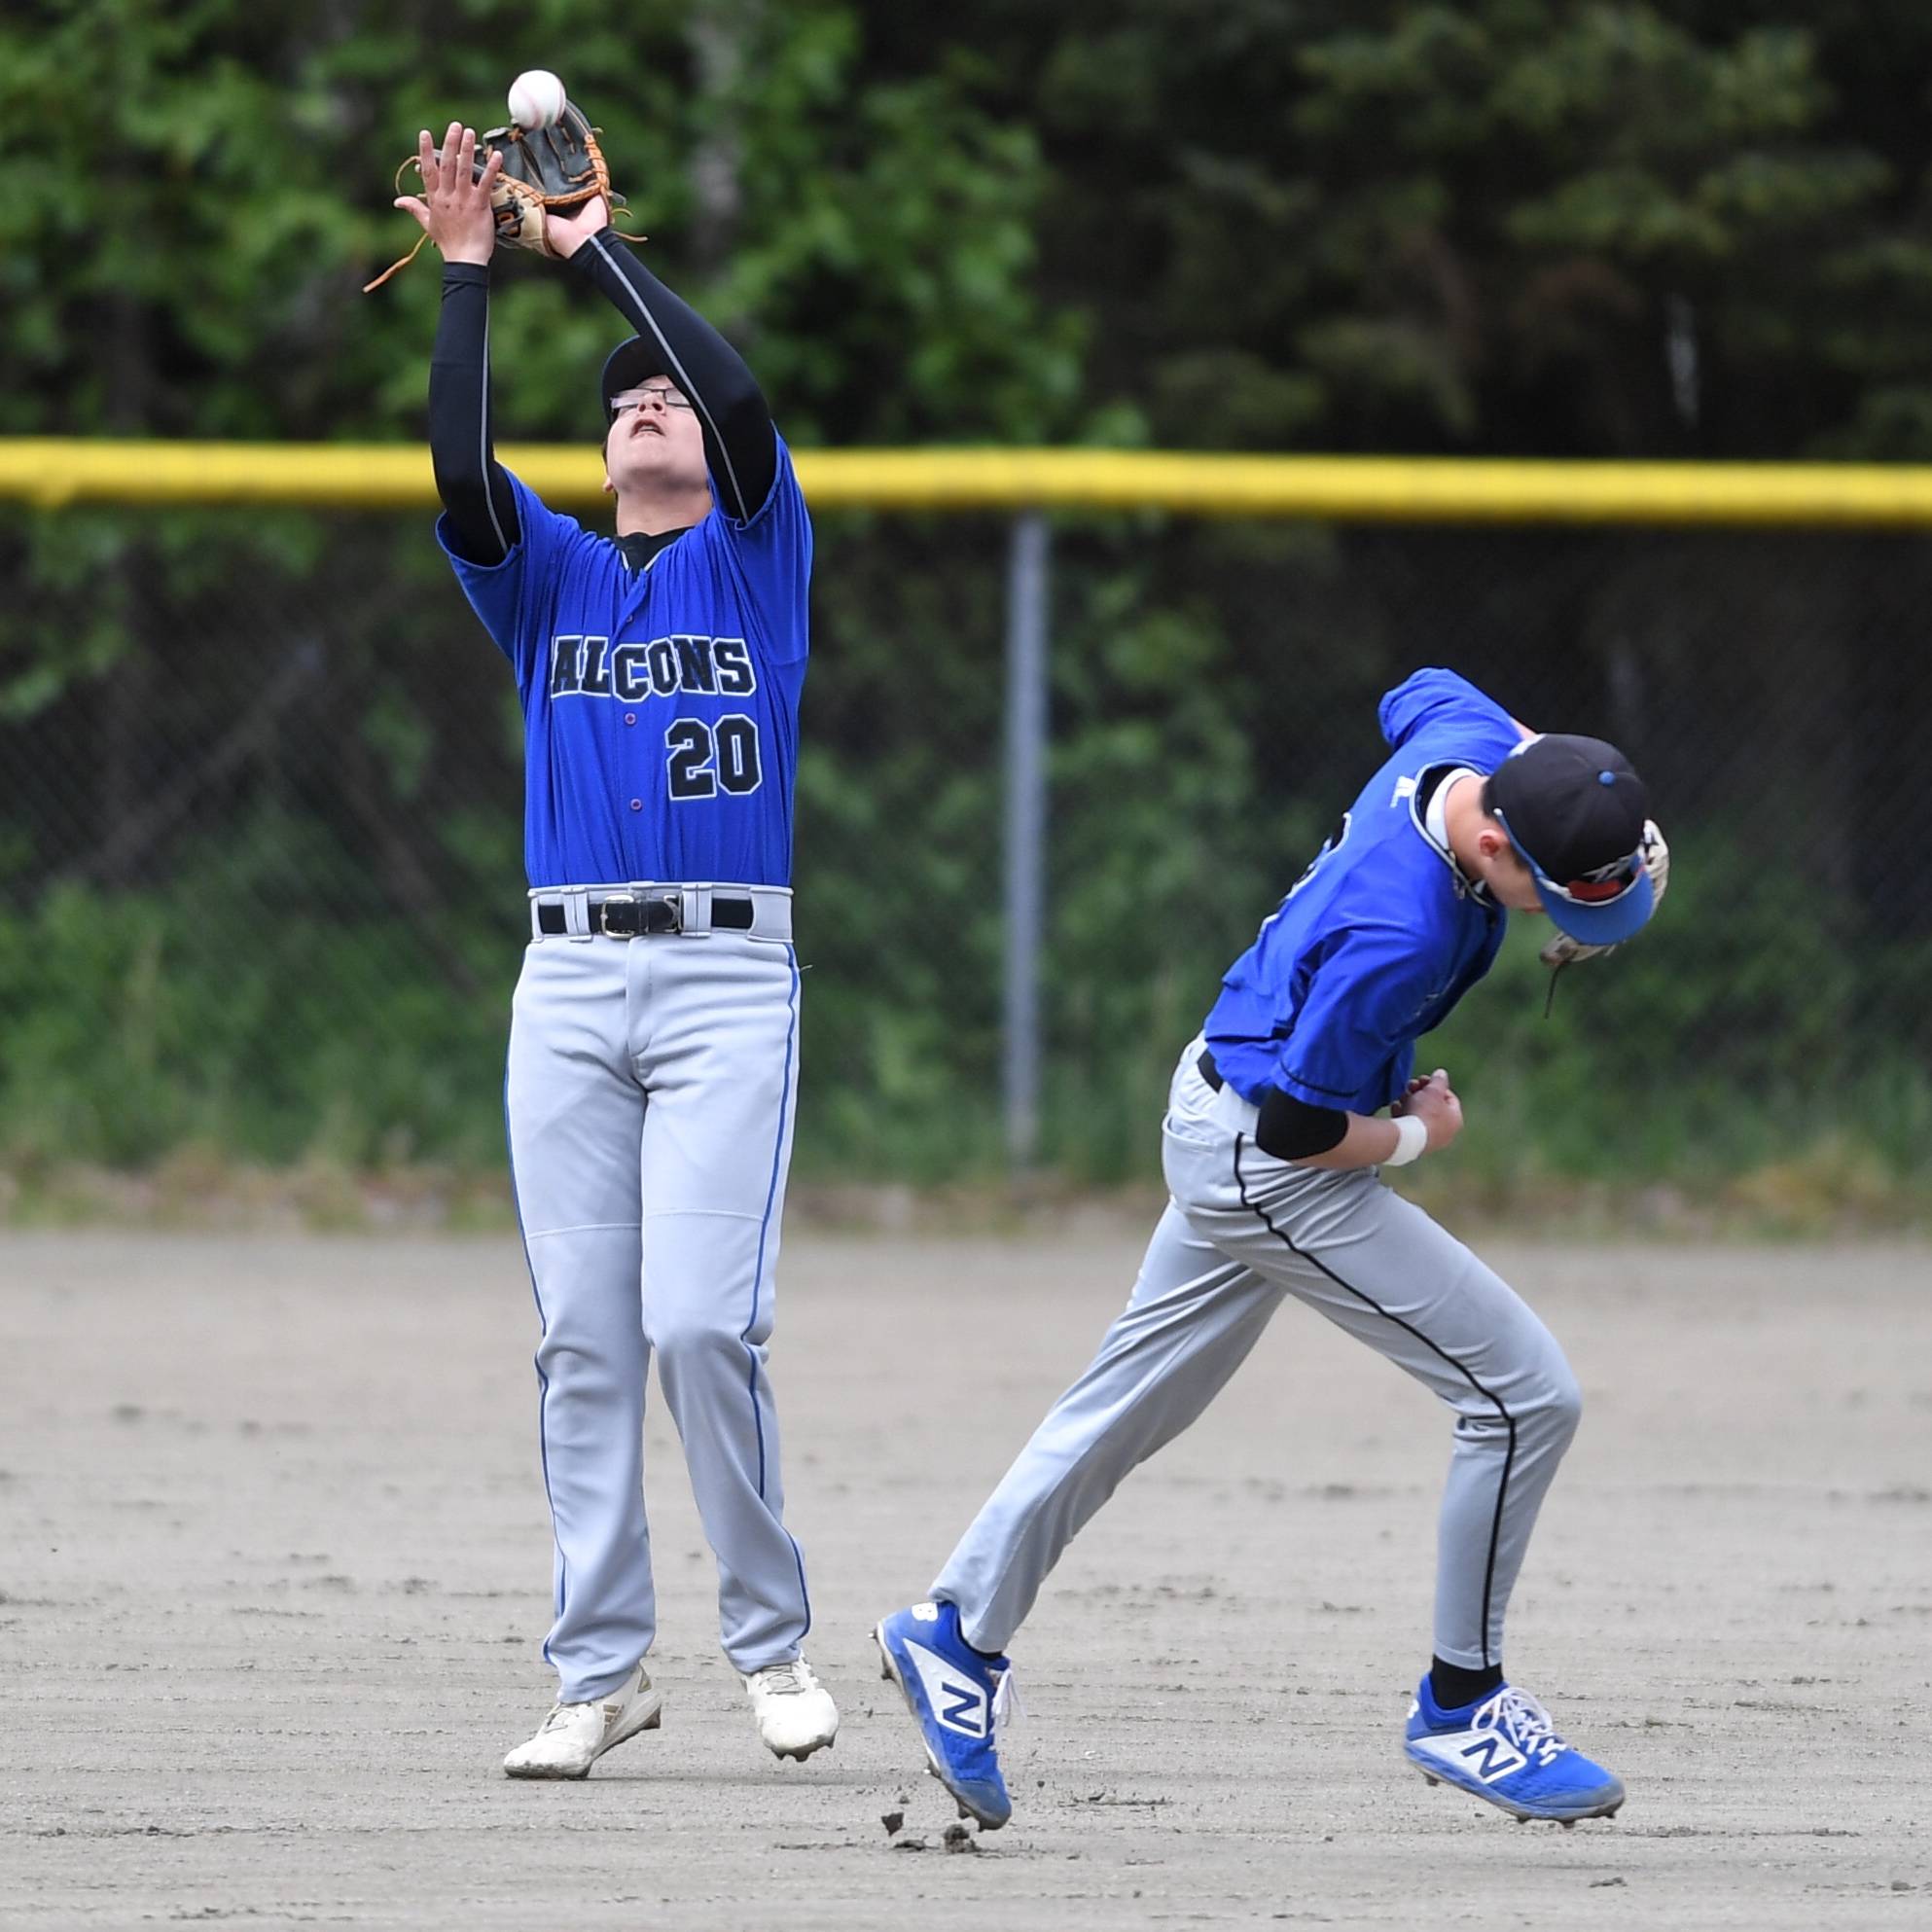 Thunder Mountain’s Oliver Mendoza catches a fly all against Sitka as teammate Bryson Echiverri ducks out of the way during the Region V Baseball Championship at Adair-Kennedy Memorial Park on Friday, May 24, 2019. (Michael Penn | Juneau Empire)